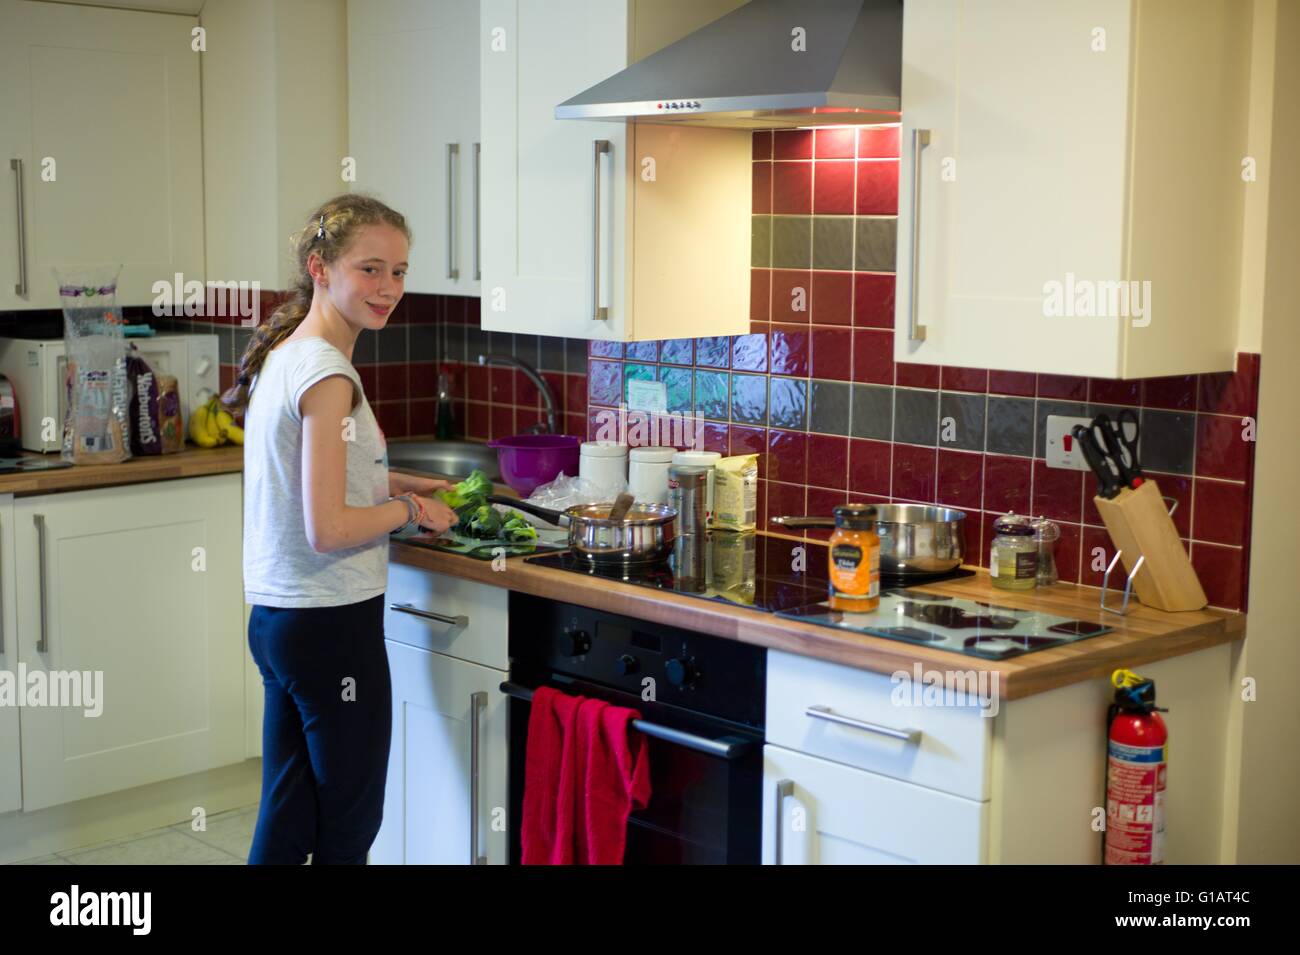 Teenage girl cooking in a kitchen Stock Photo